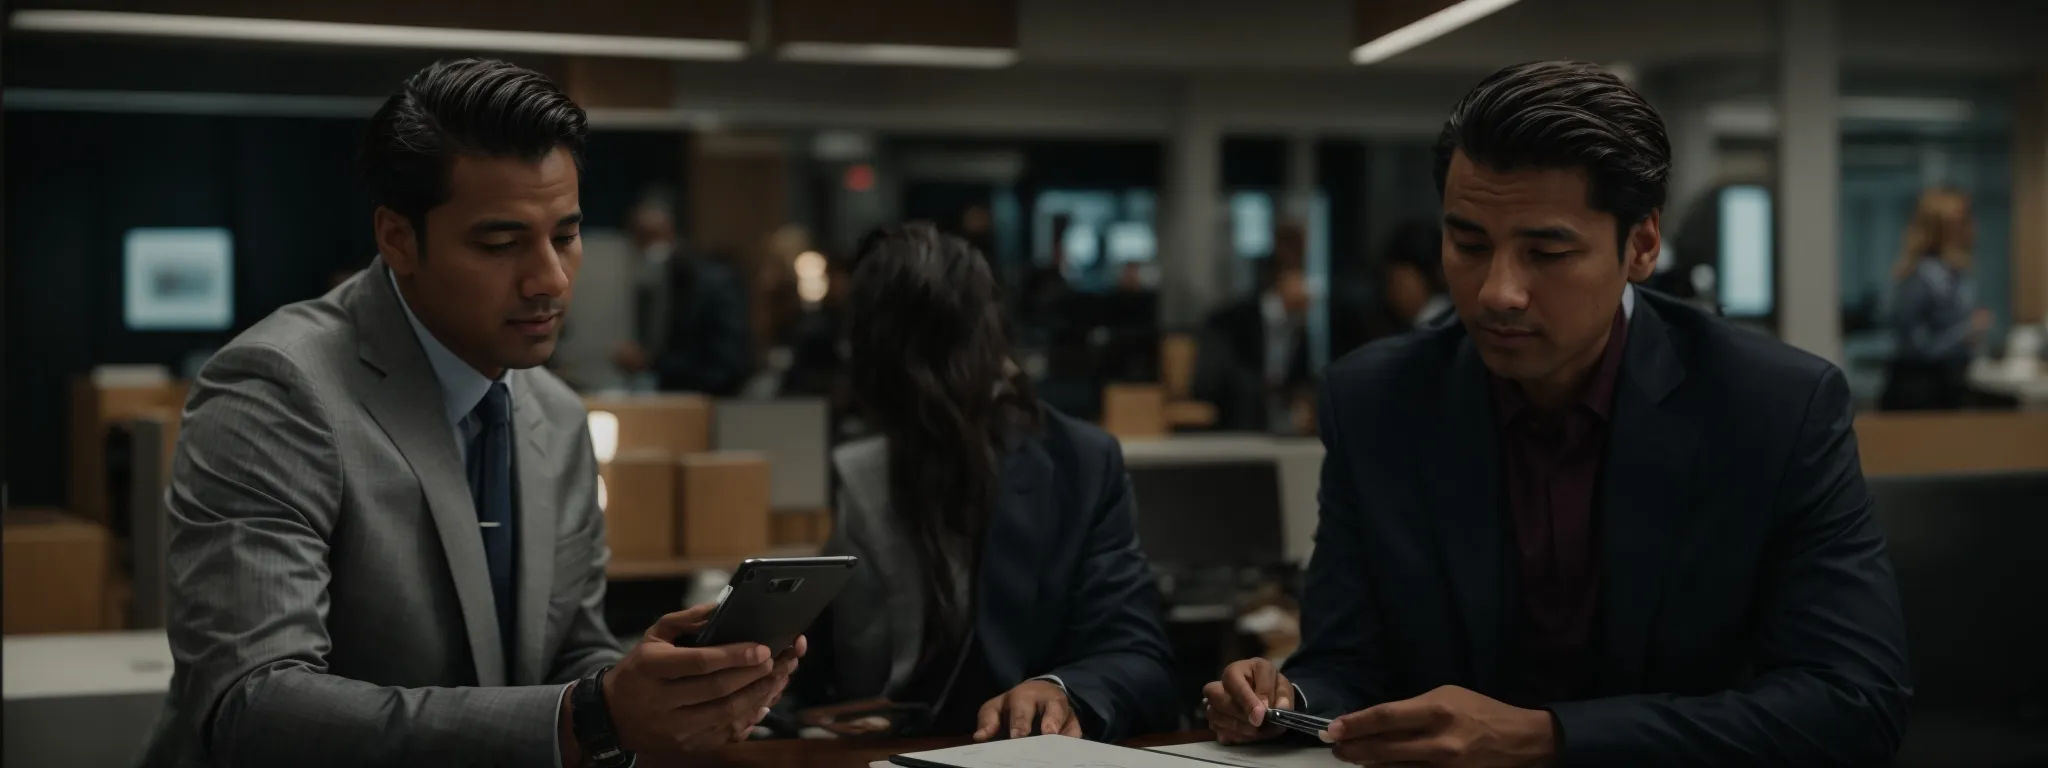 two professionals are engaged in a focused discussion over a modern, digital tablet in a sleek, well-lit office environment.